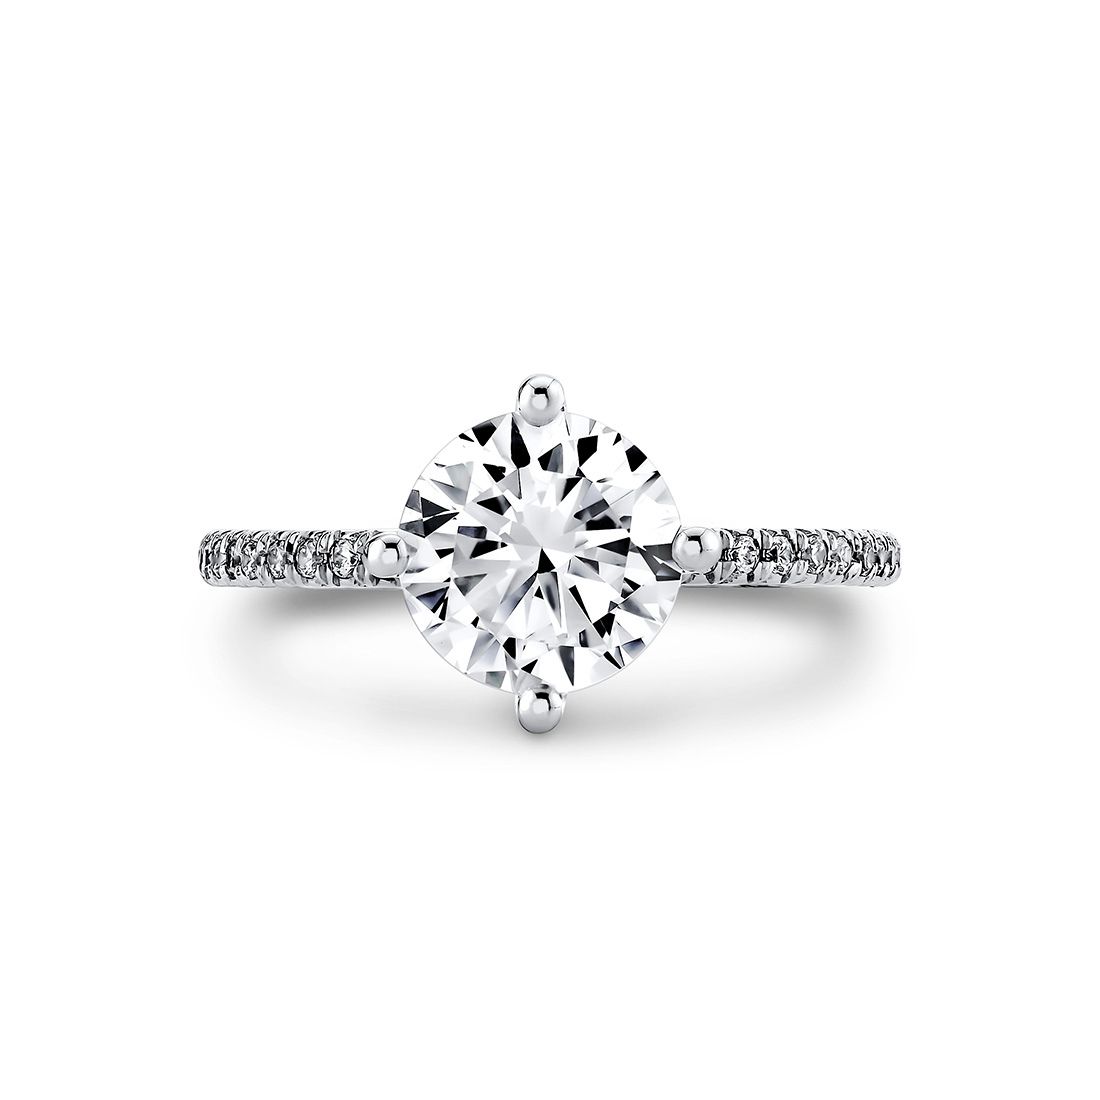 when did diamond engagement rings become popular